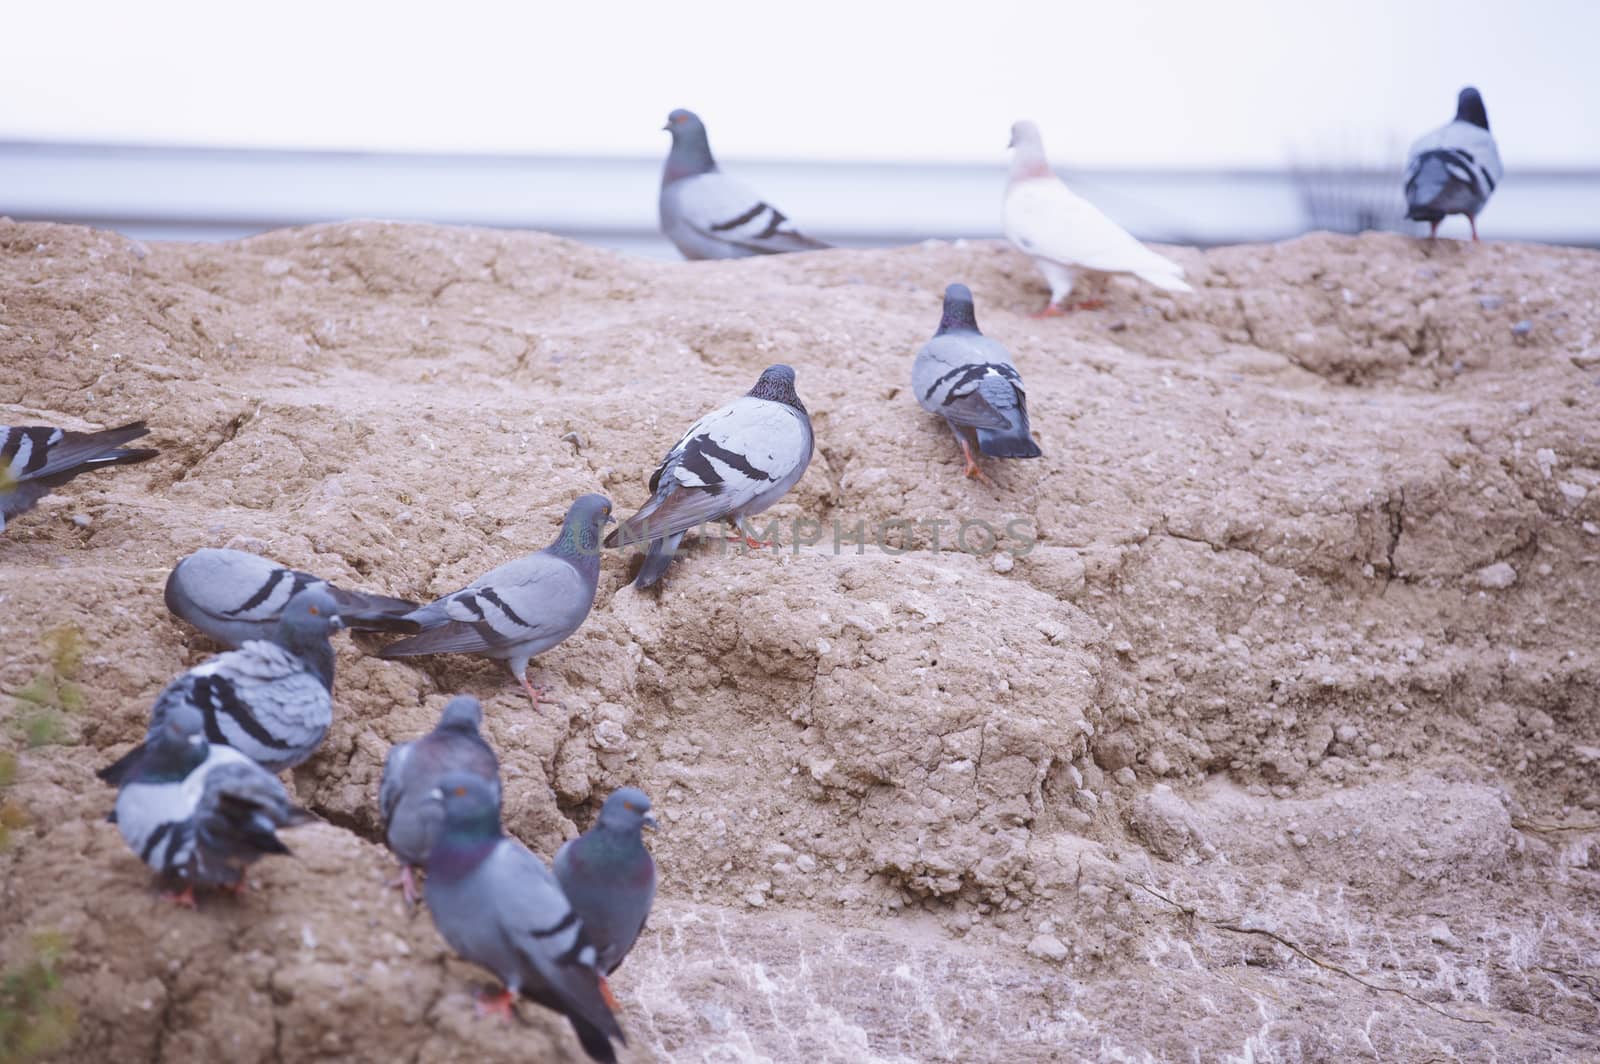 Flock of pigeons on the rock. Close-up horizontal view